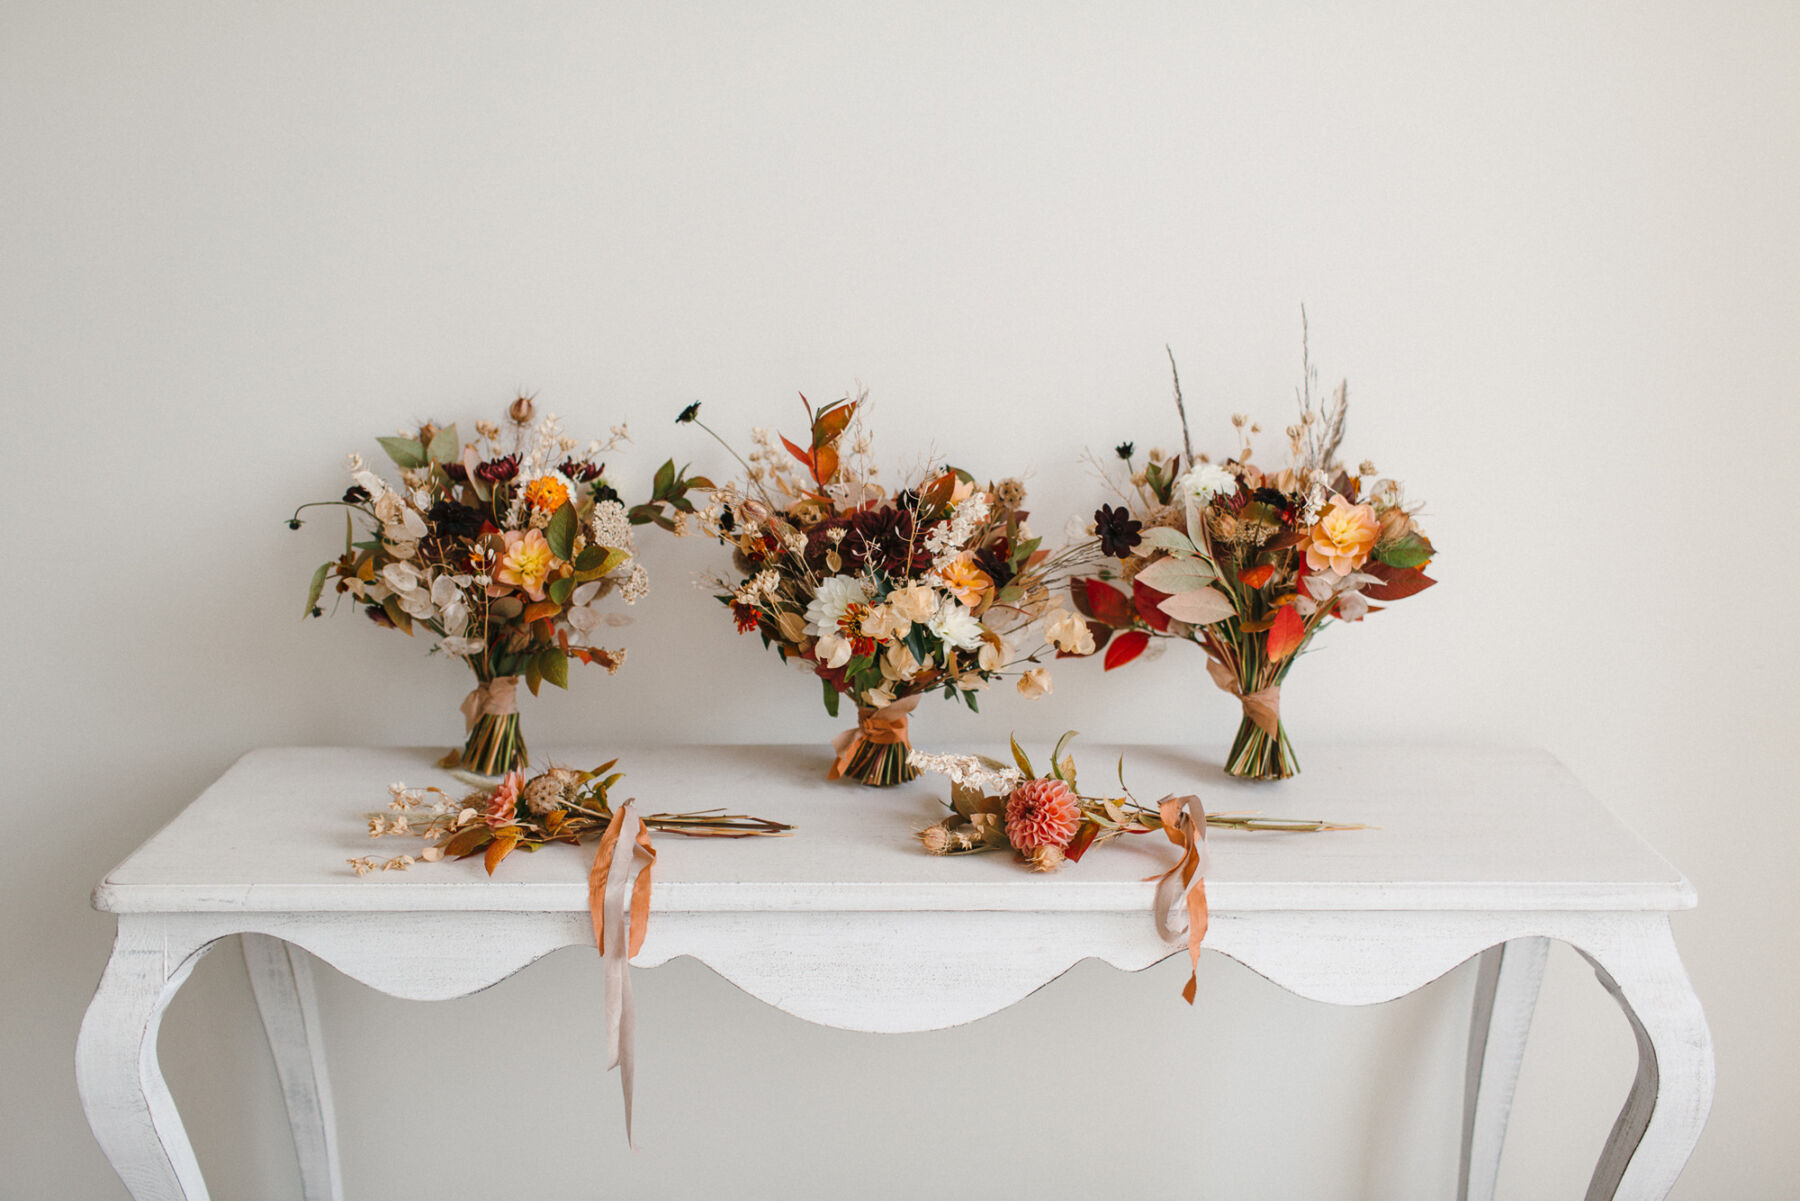 3 Autumn wedding bouquets for the bride and two bridesmaids, and two smaller flowergirl bouquets. 